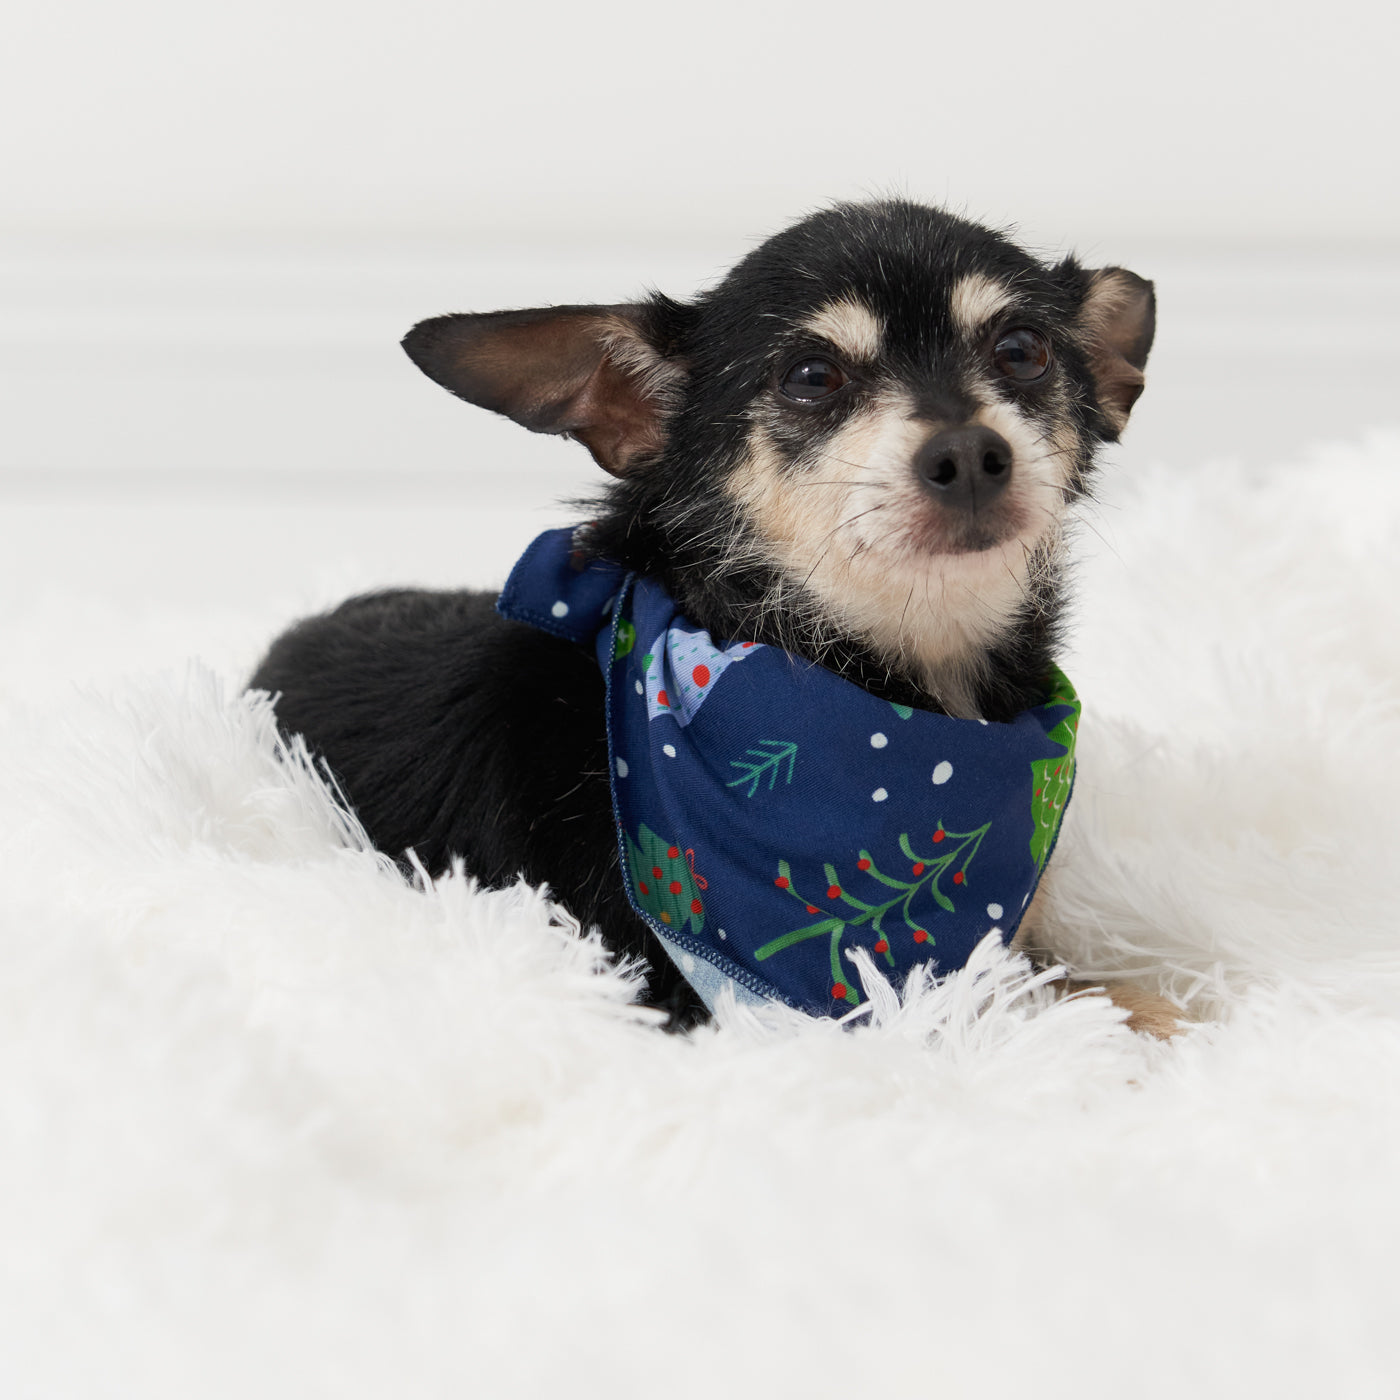 Alternate image of a small dog posing wearing a Blue Merry and Bright pet bandana